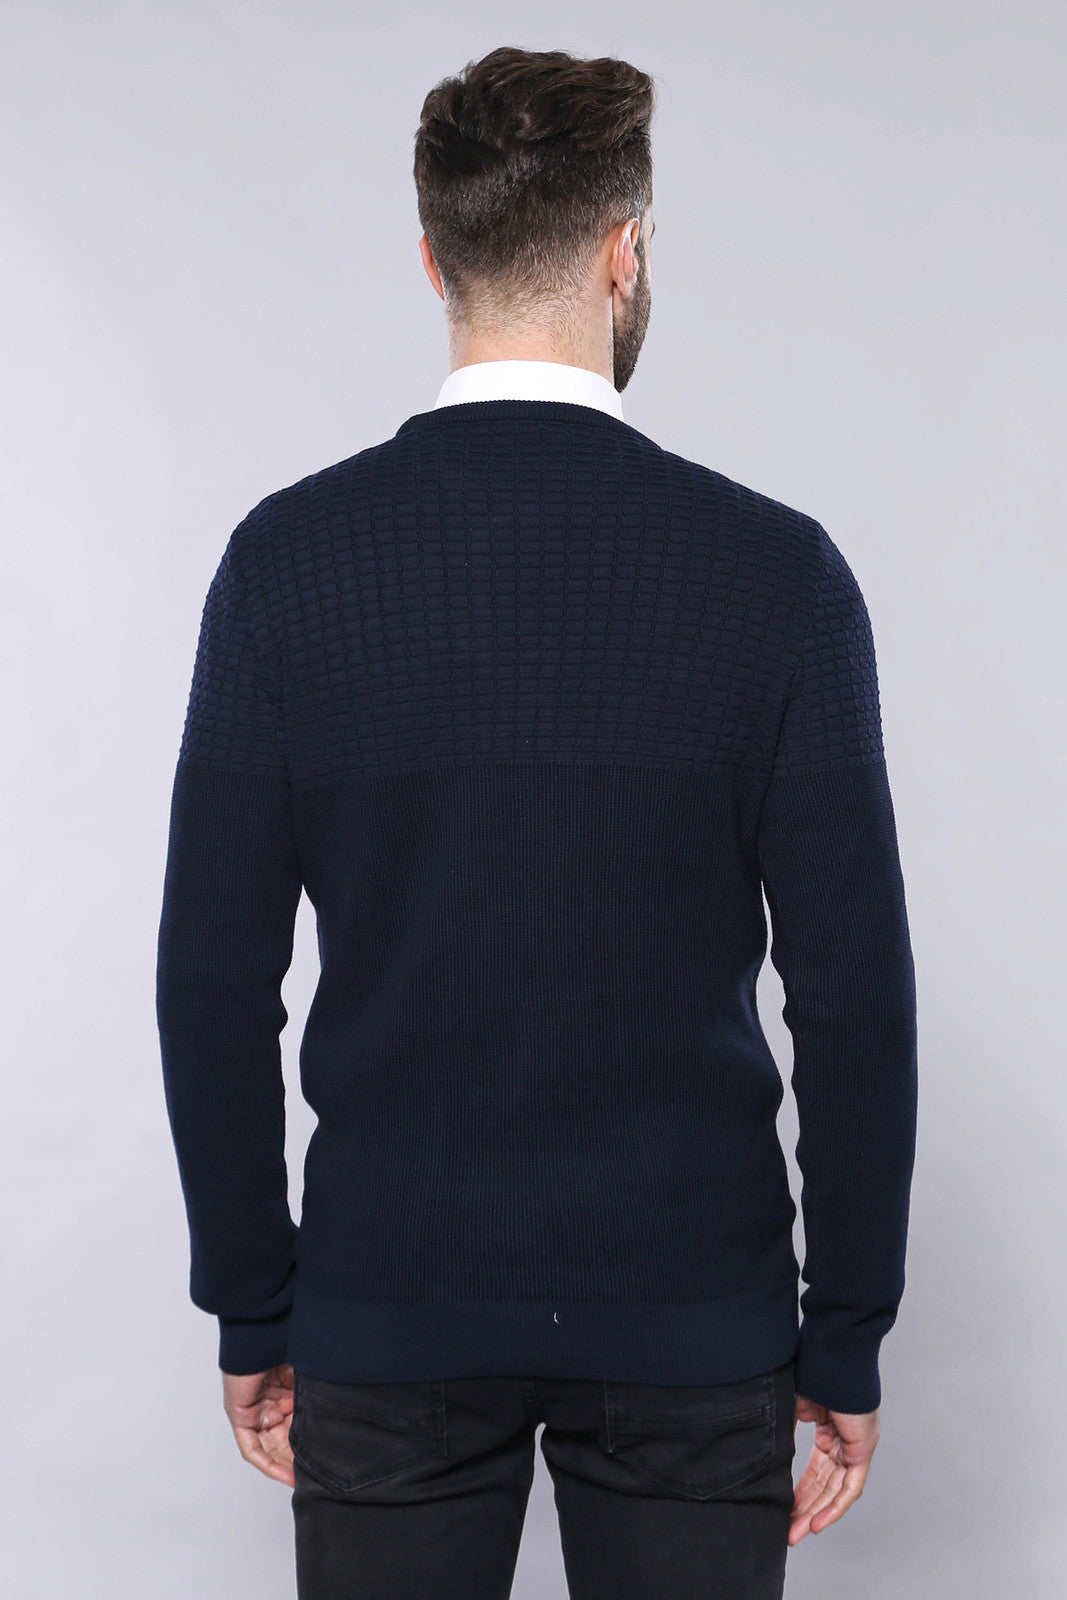 Circle Neck Navy Sweater - Wessi